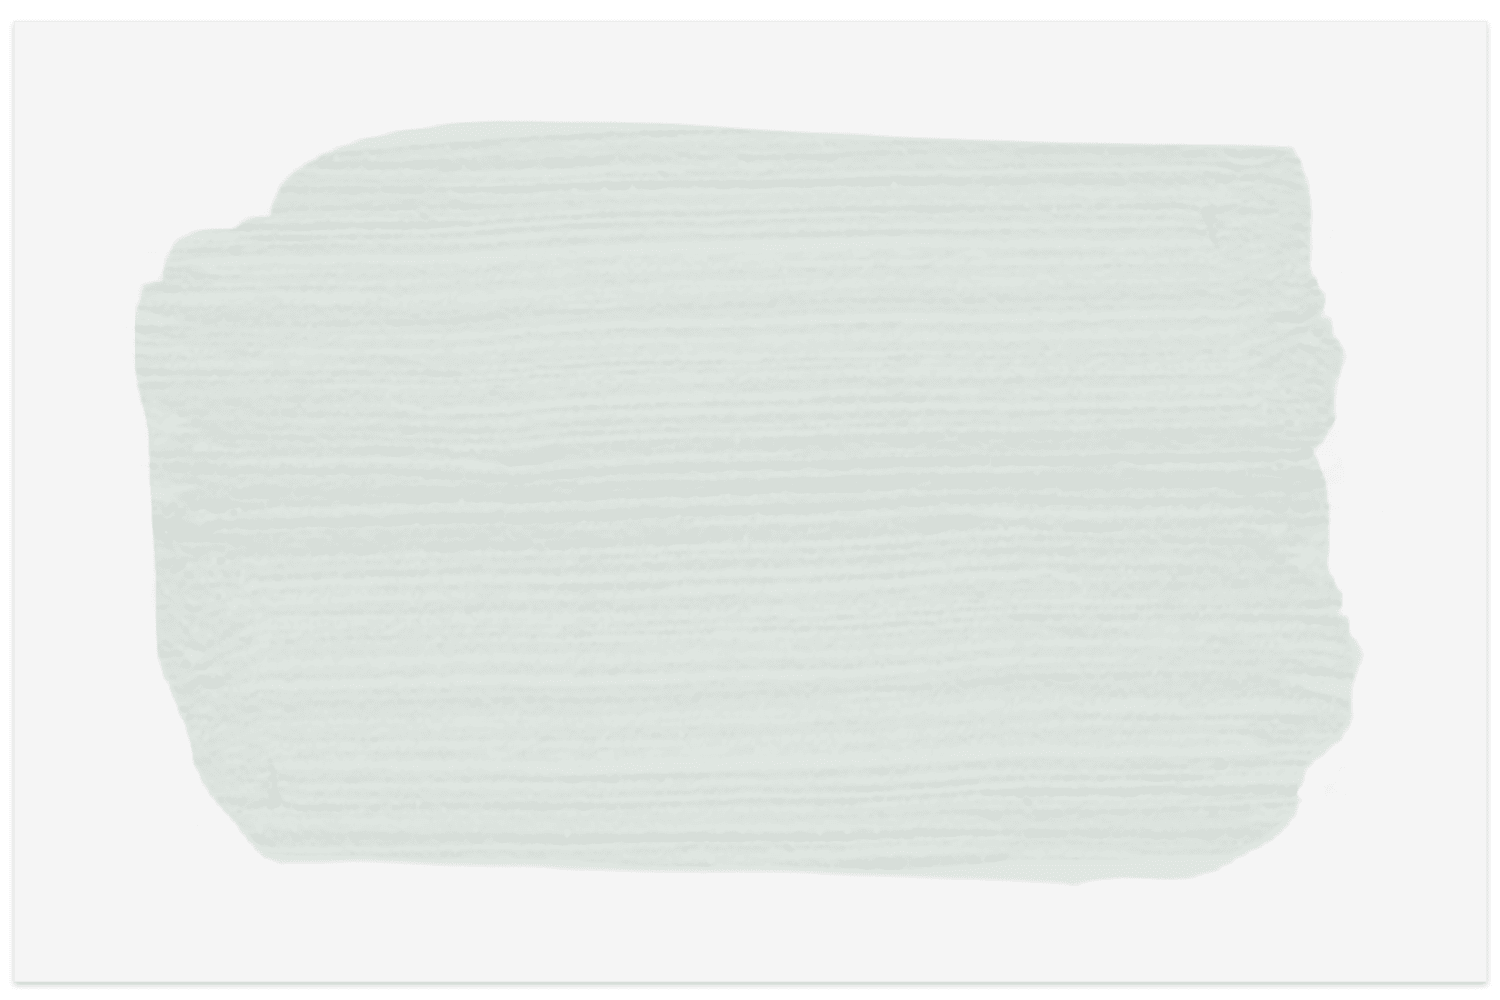 Glimmer swatch from Sherwin-Williams